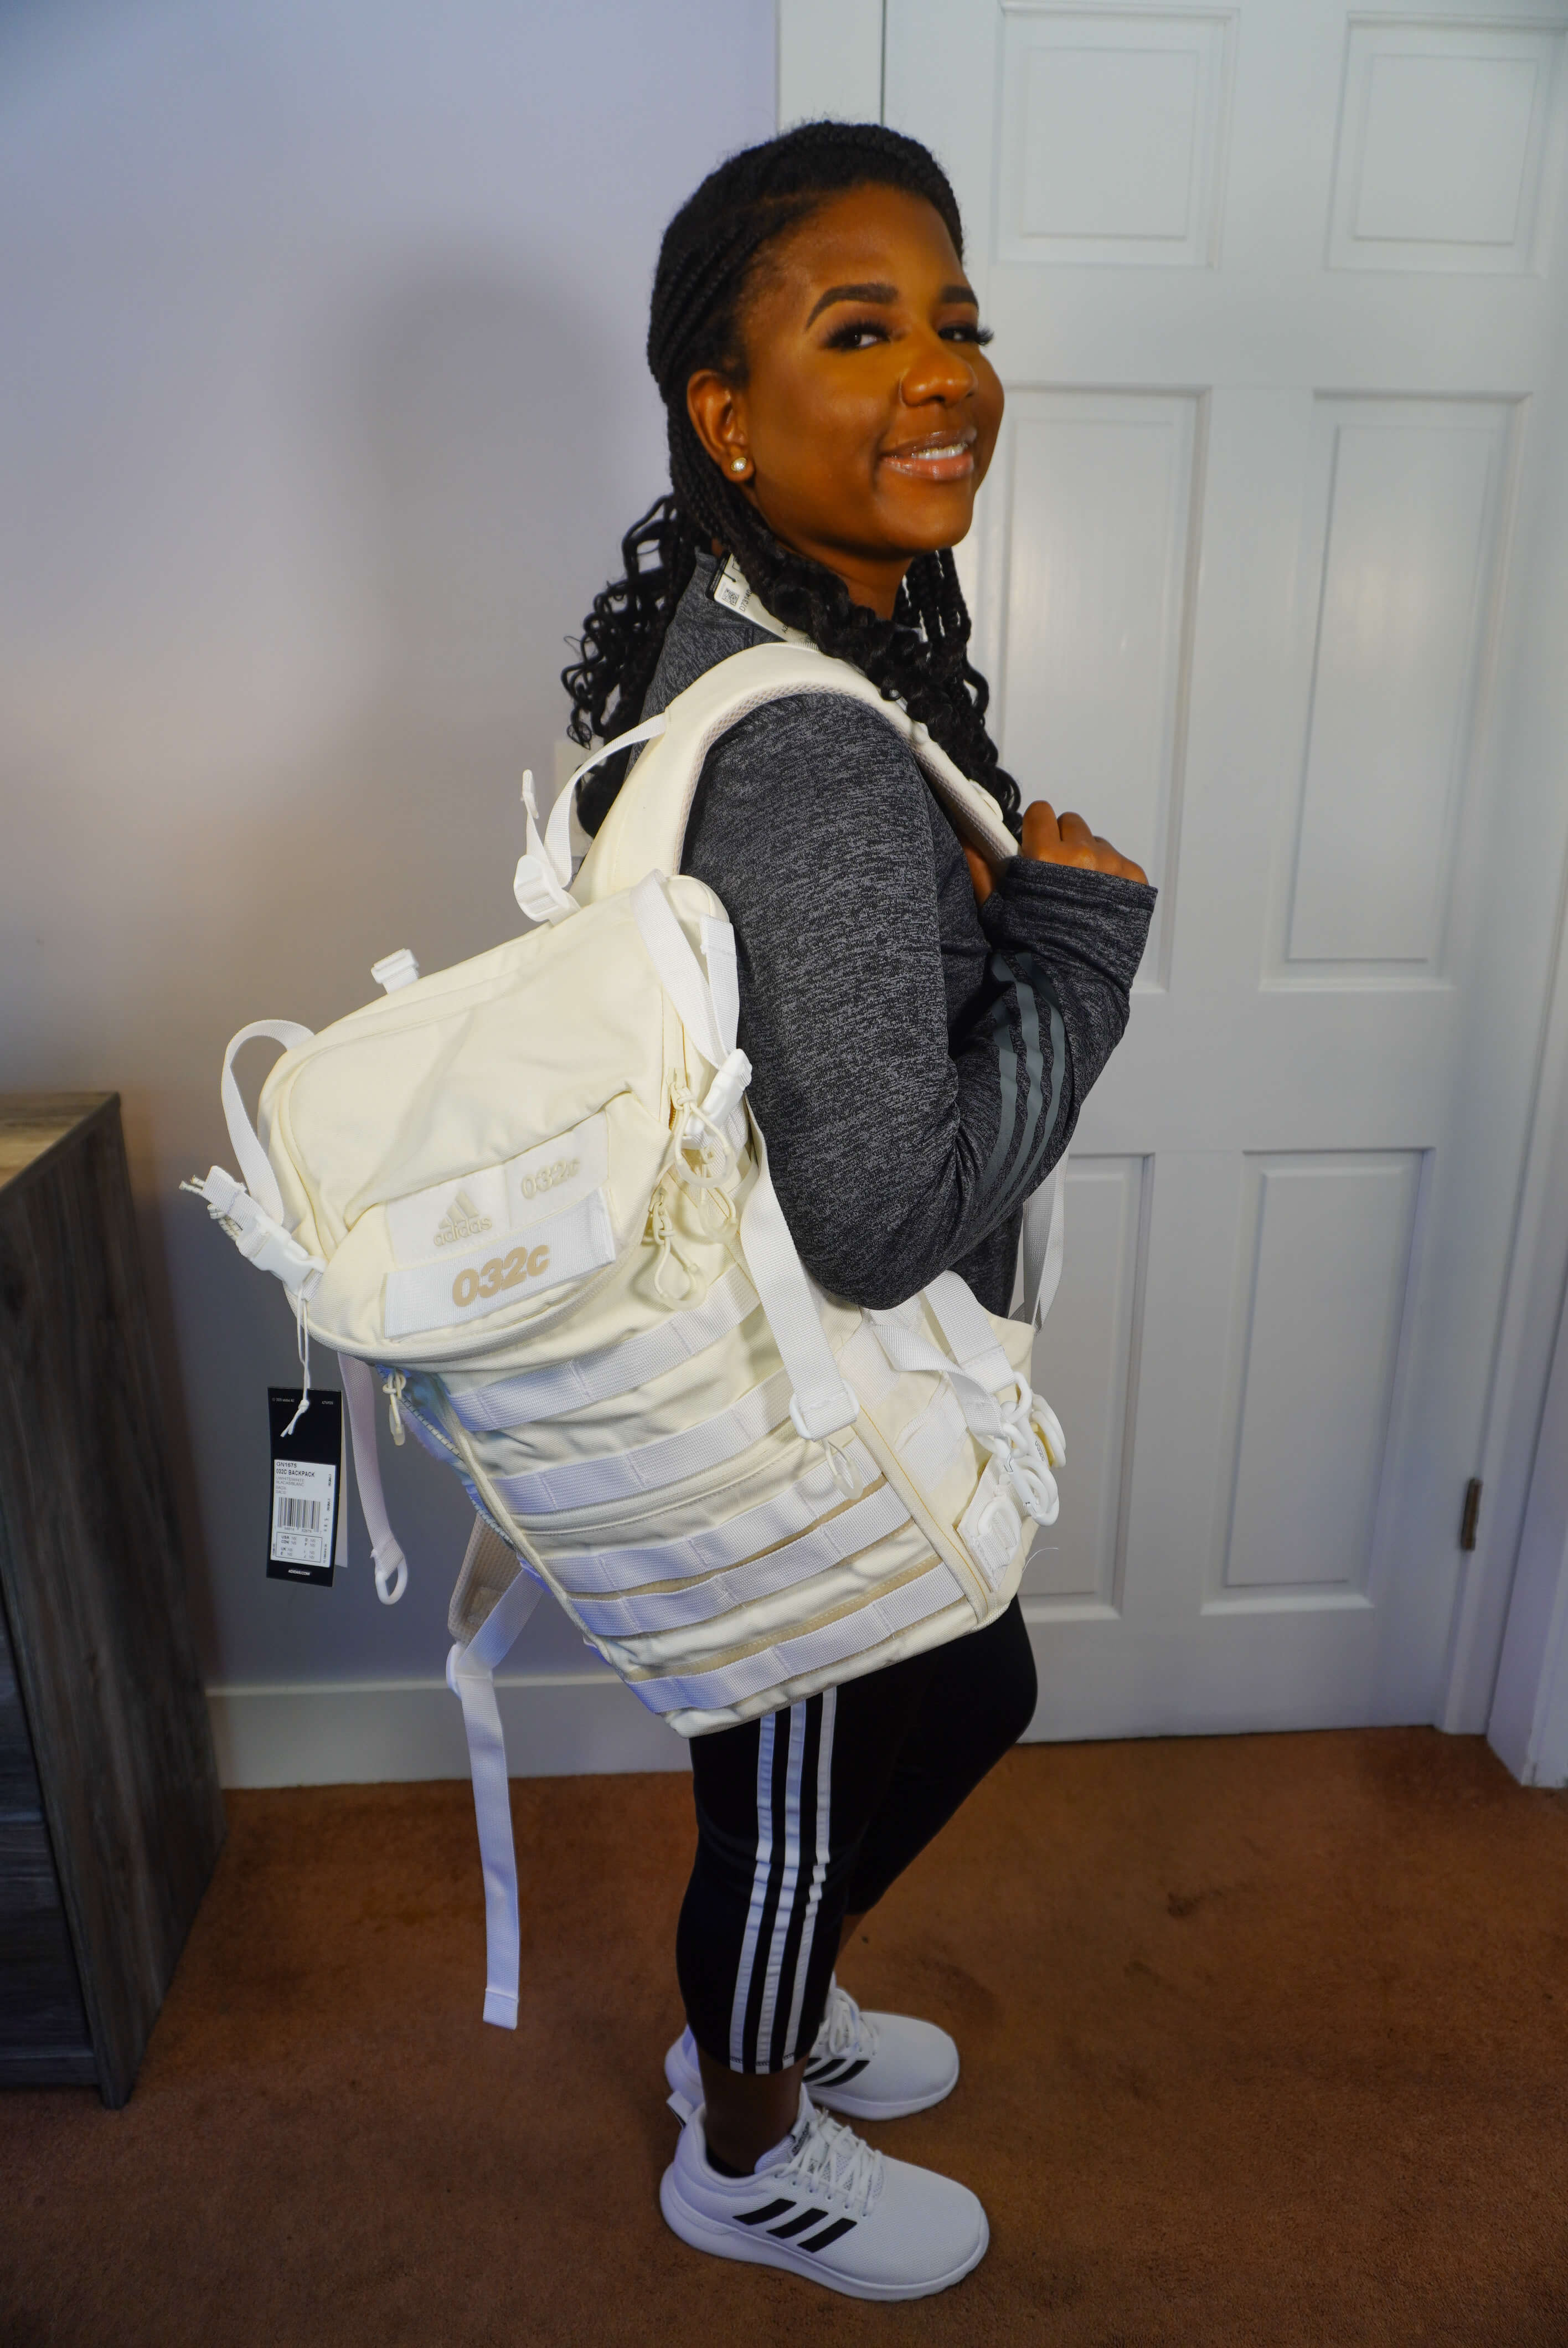 Image of me posing with a cream Adidas backpack. I am wearing white Adidas sneakers, with black leggings, and a long sleeve gray top.